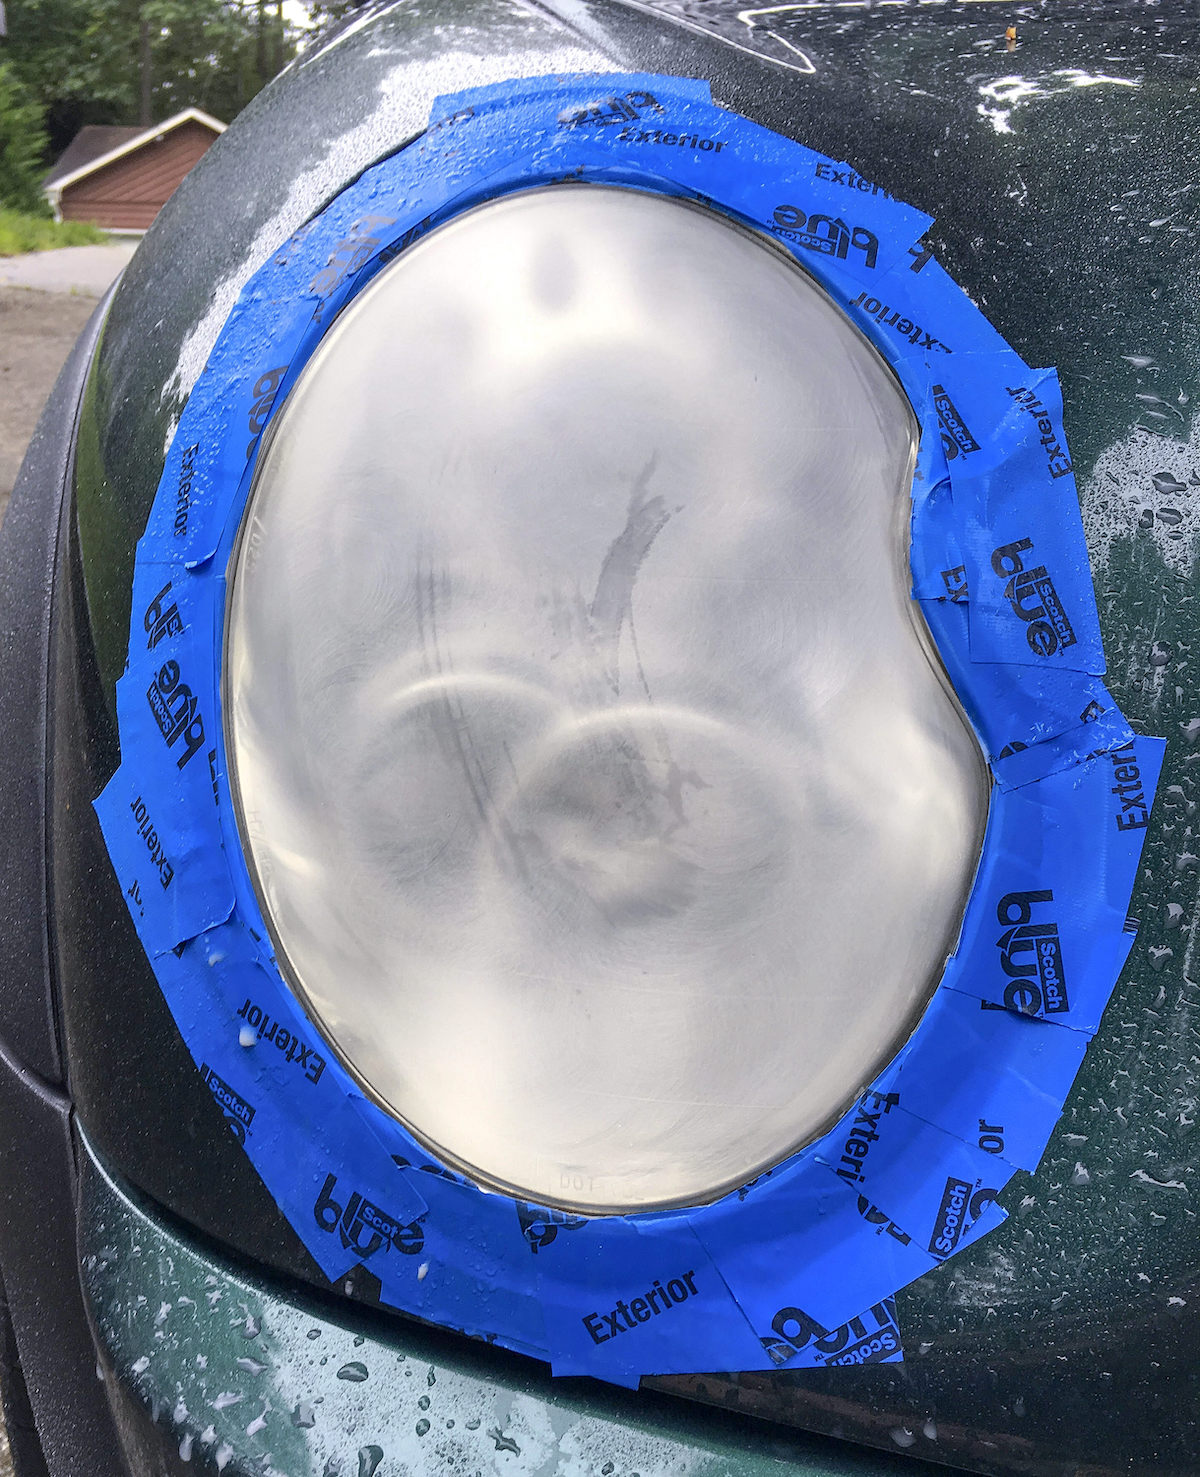 Headlight sprayed with water after initial dirt removal